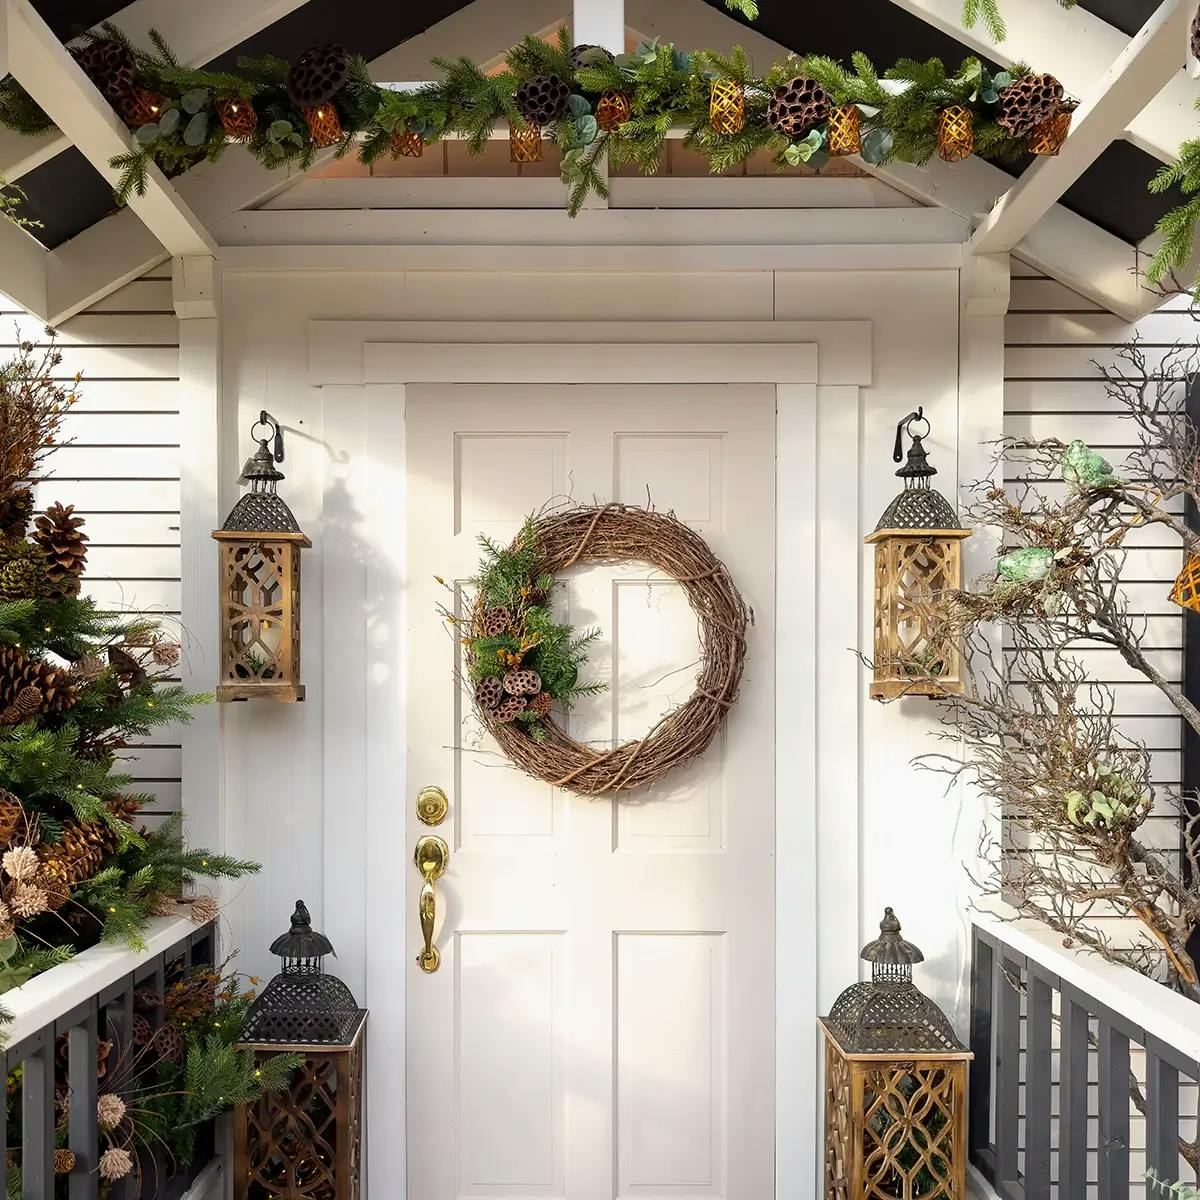 Natural Christmas porch decorations on a white porch.